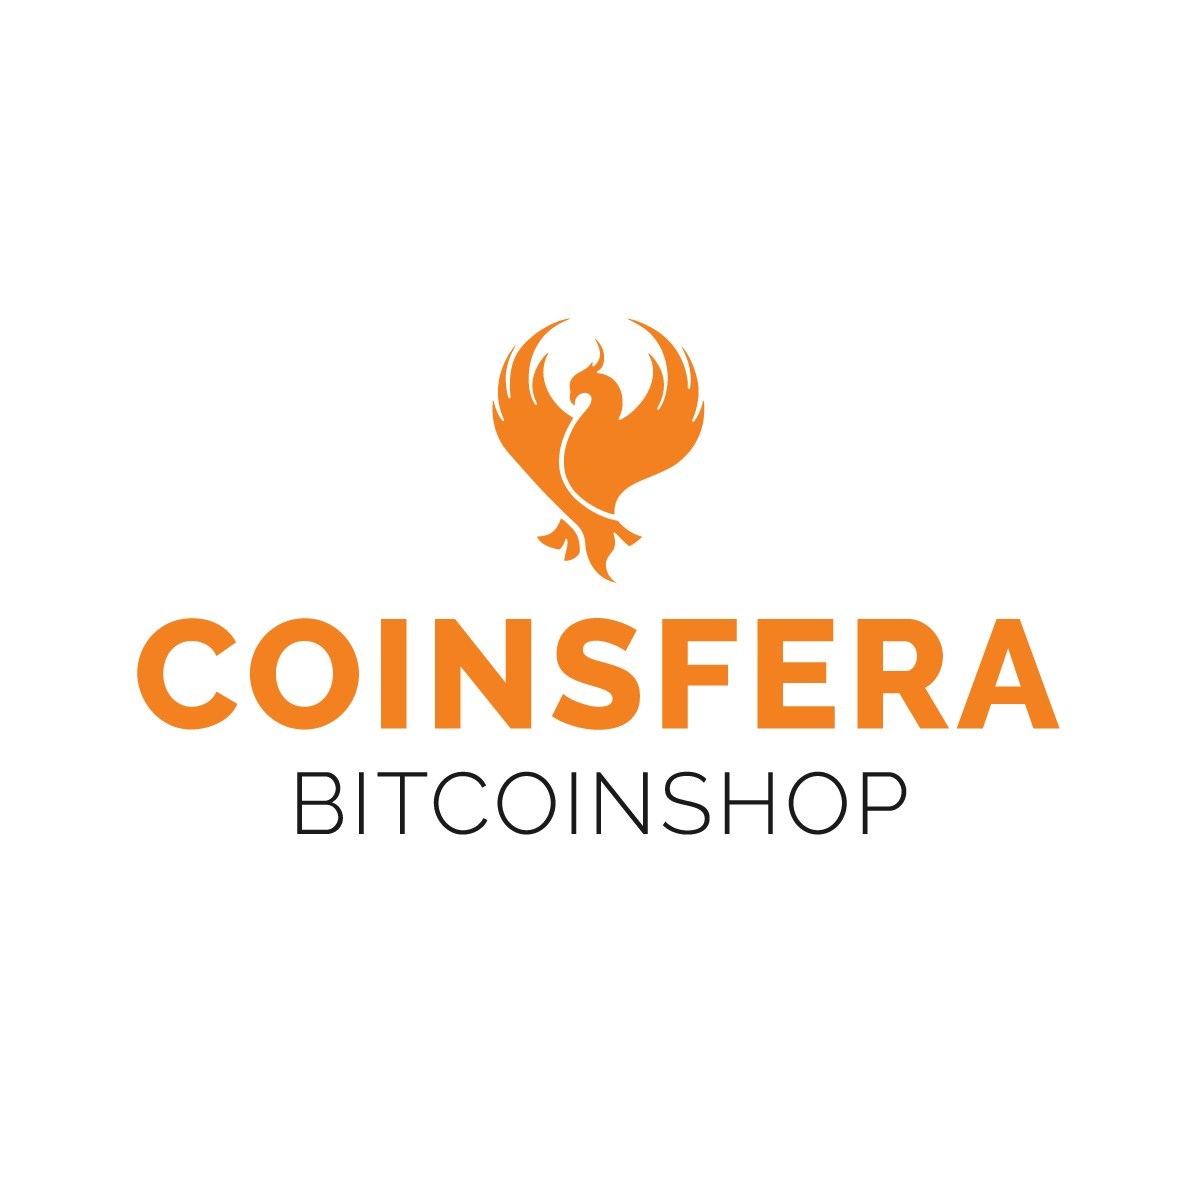 Sell Tether (USDT) in Dubai with Coinsfera